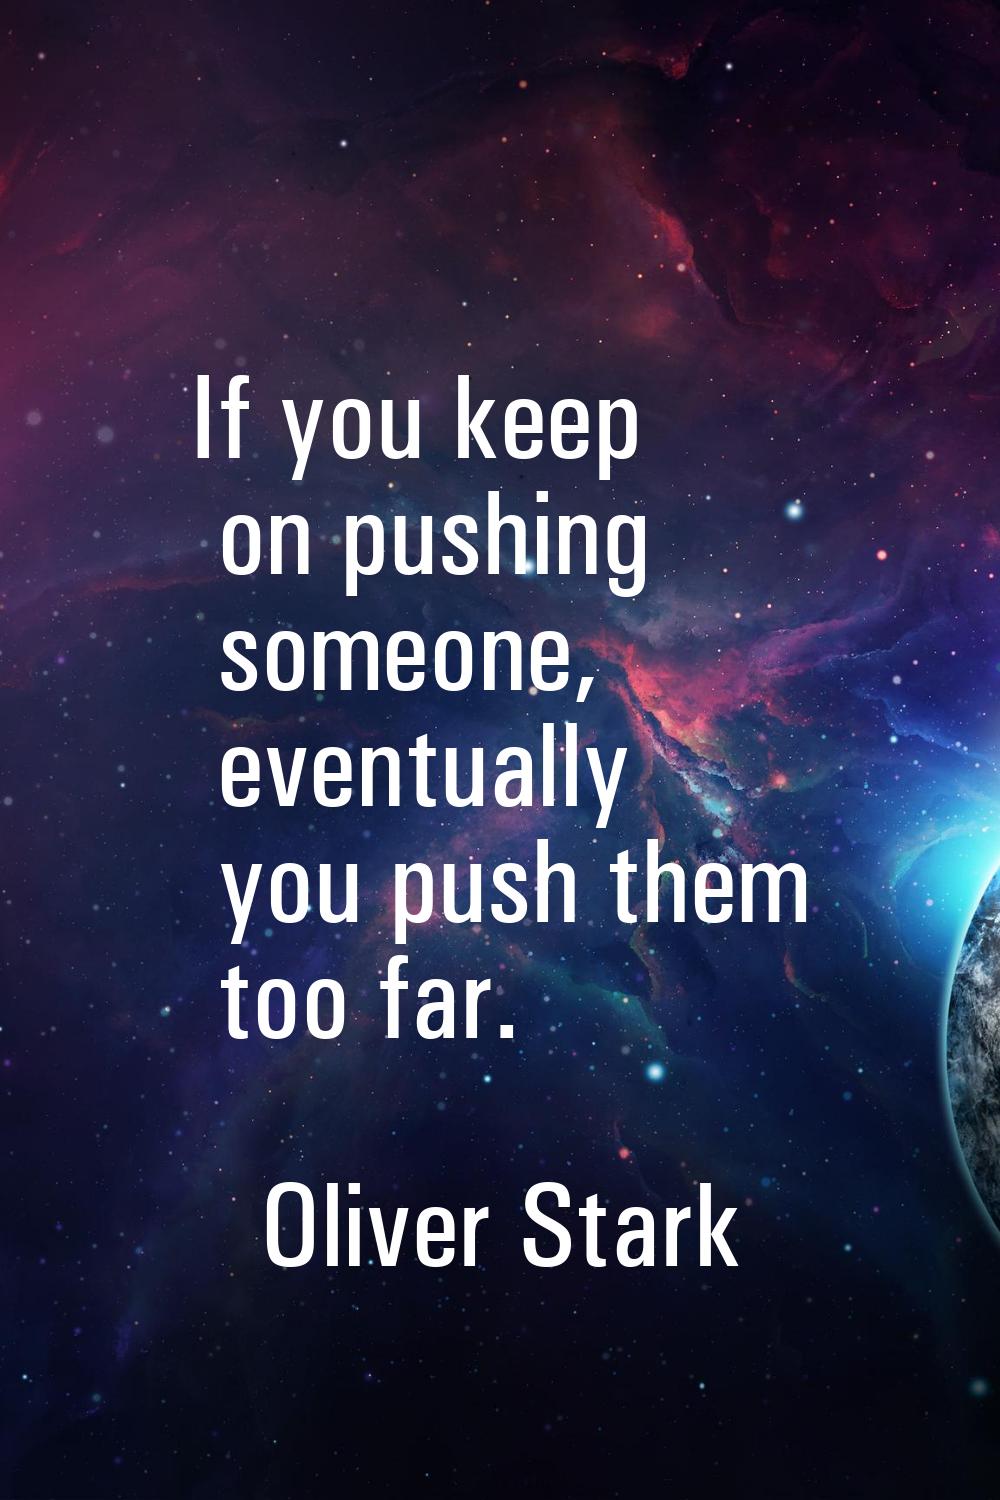 If you keep on pushing someone, eventually you push them too far.